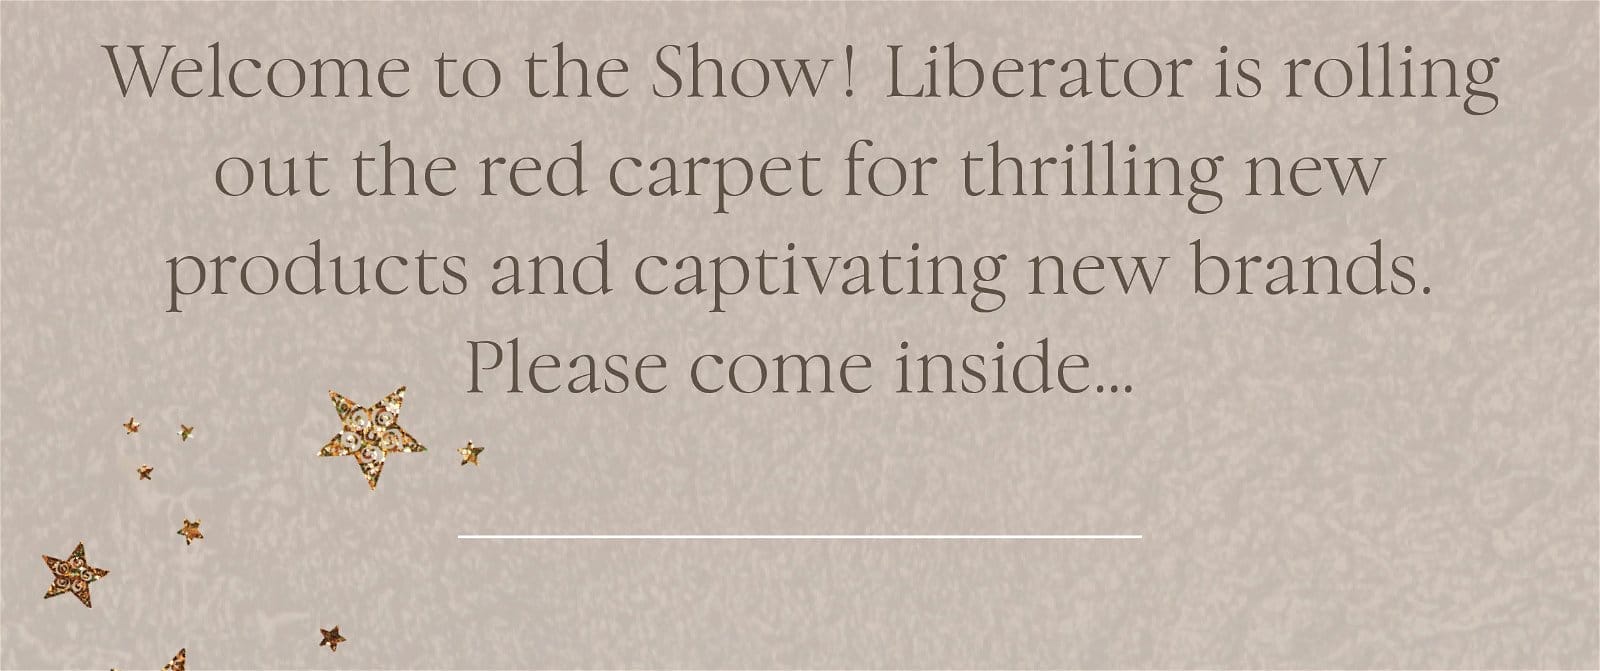 Welcome to the Show! Liberator is rolling out the red carpet for thrilling new products and captivating new brands. Please come inside…